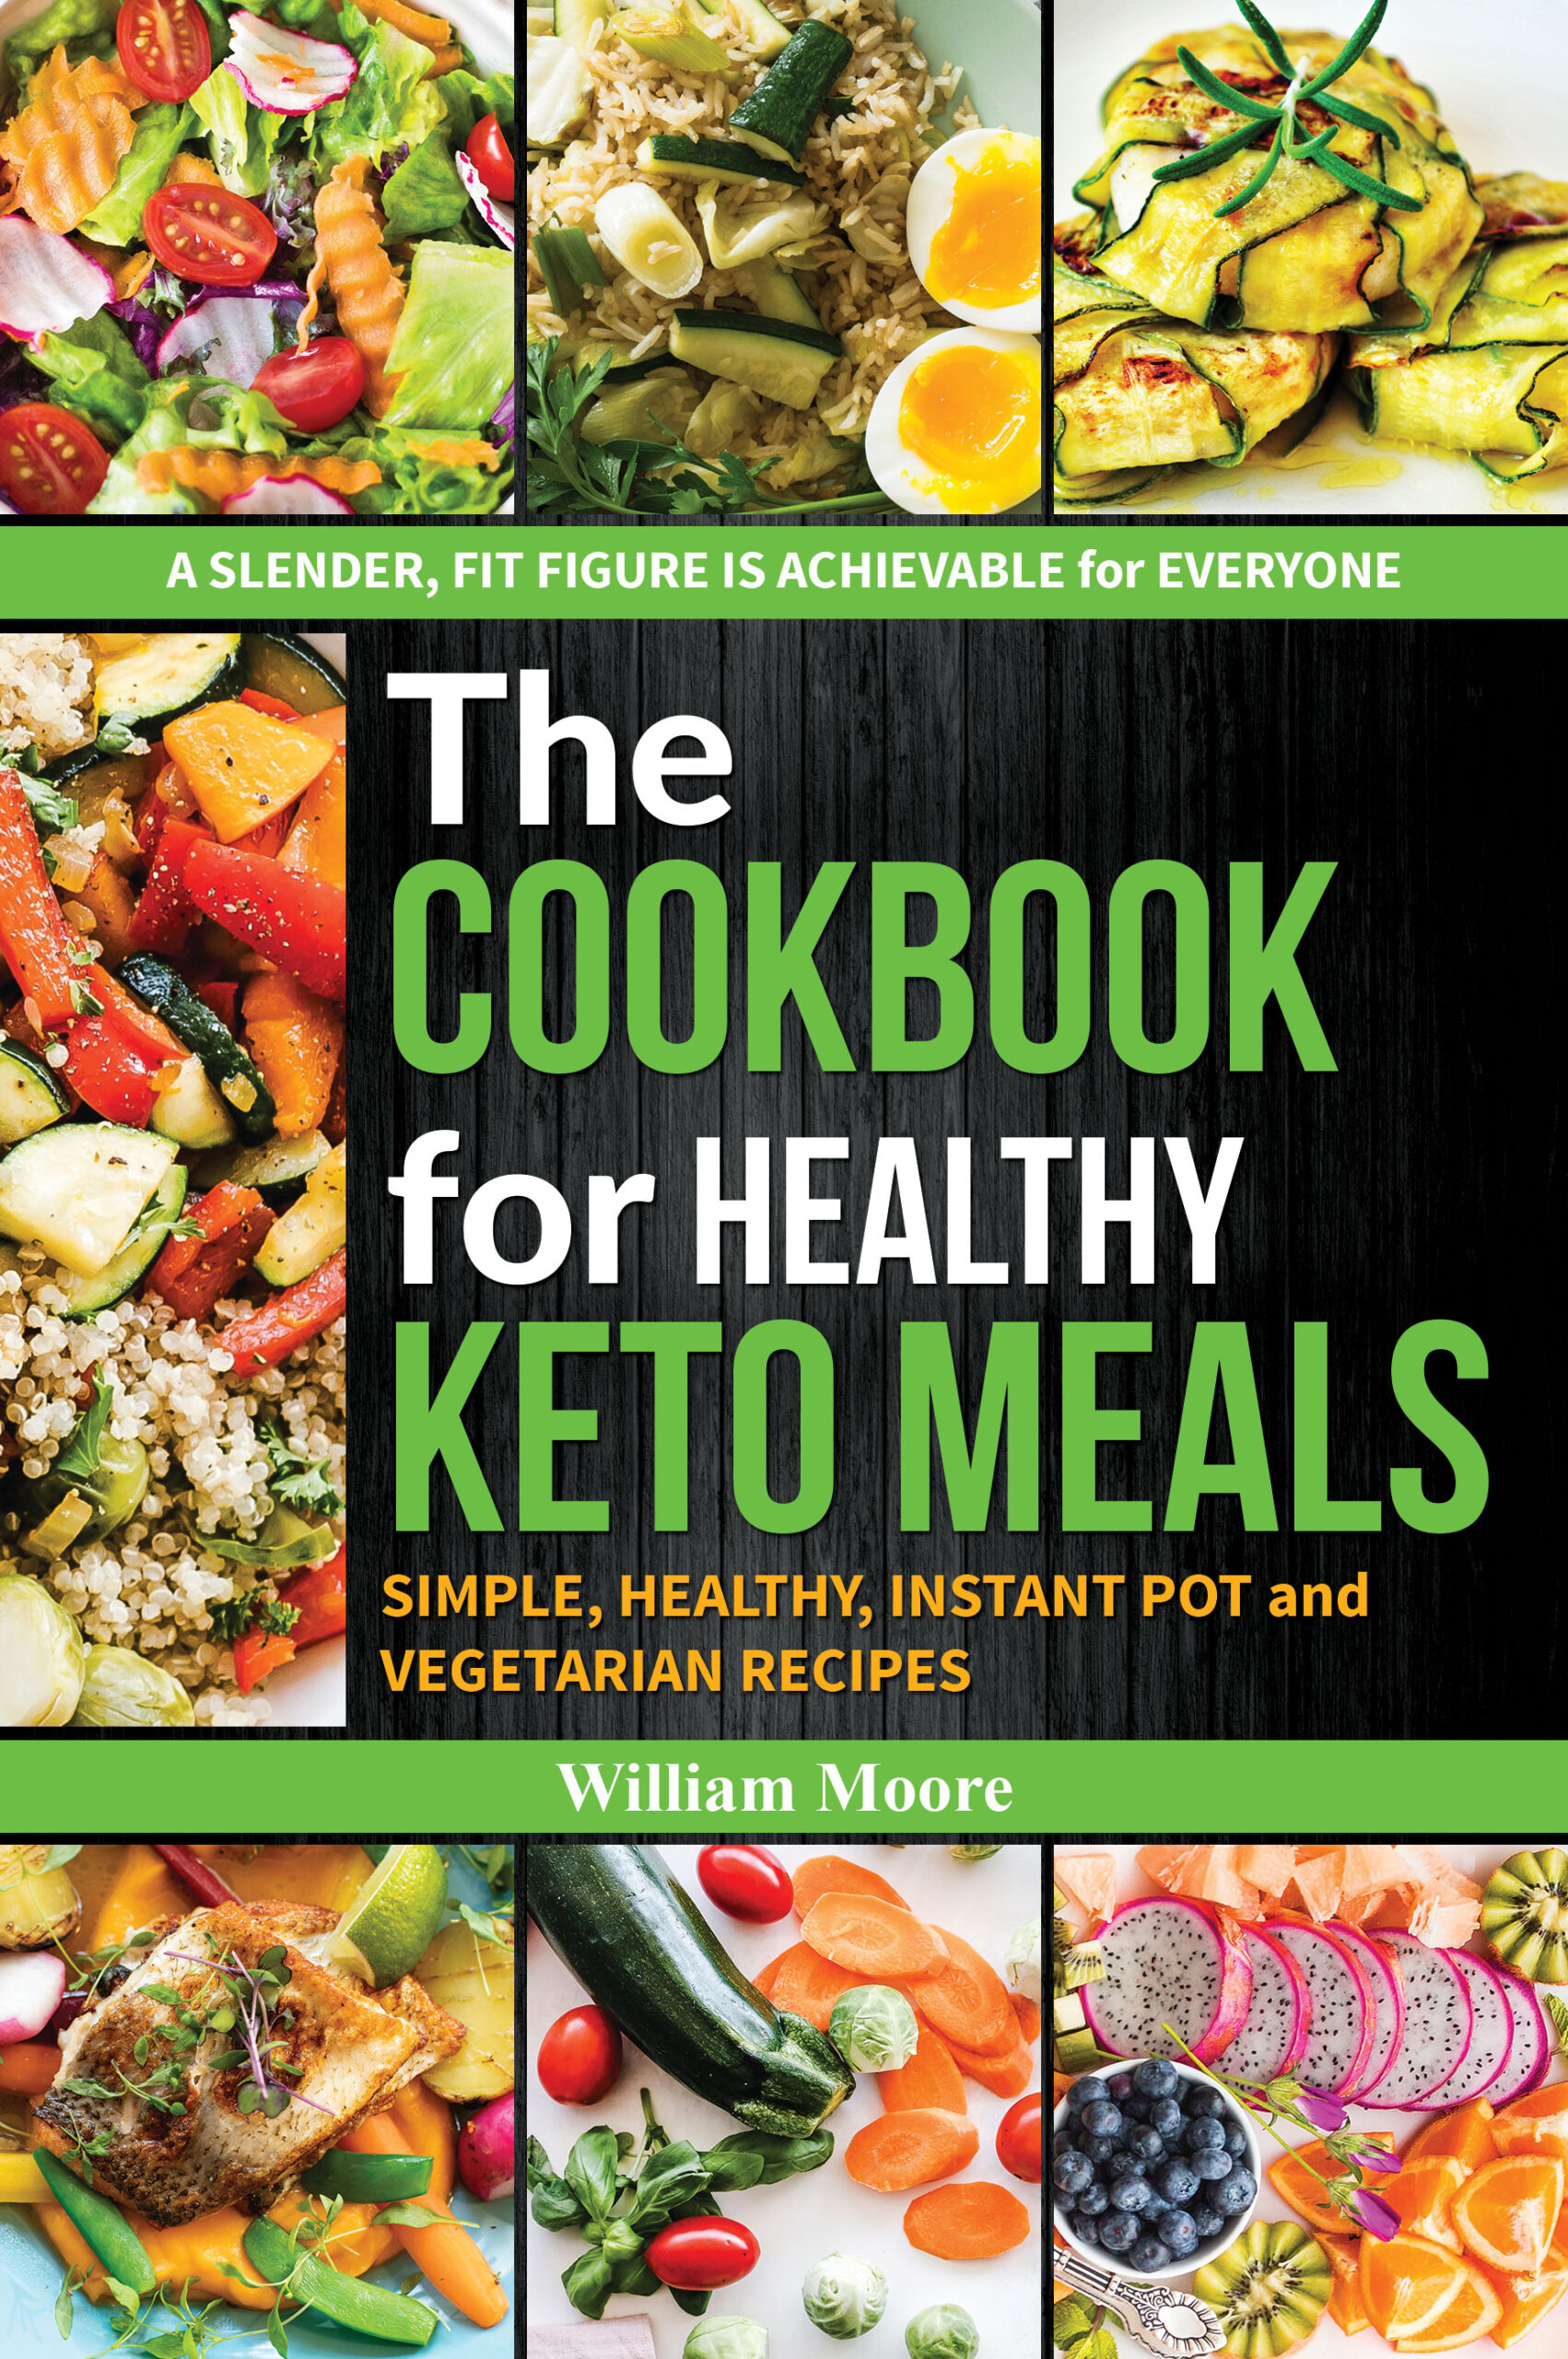 FREE: The cookbook for healthy keto meals by William Moore